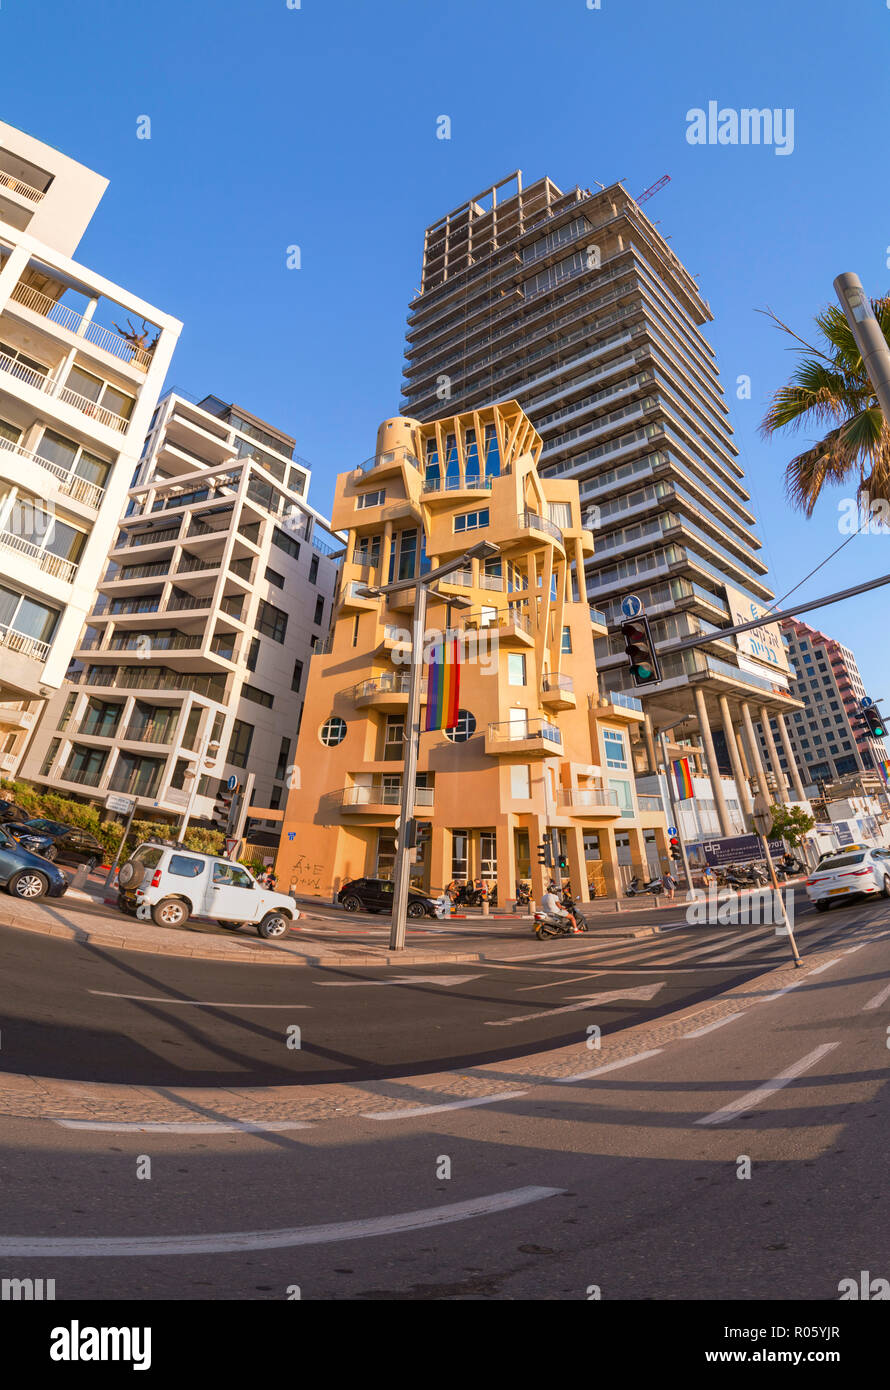 Tel Aviv-Yafo, Israel - June 6, 2018: Generic architecture and cityscape from Tel Aviv, Modern and old buildings in the central streets of Tel Aviv-Ya Stock Photo